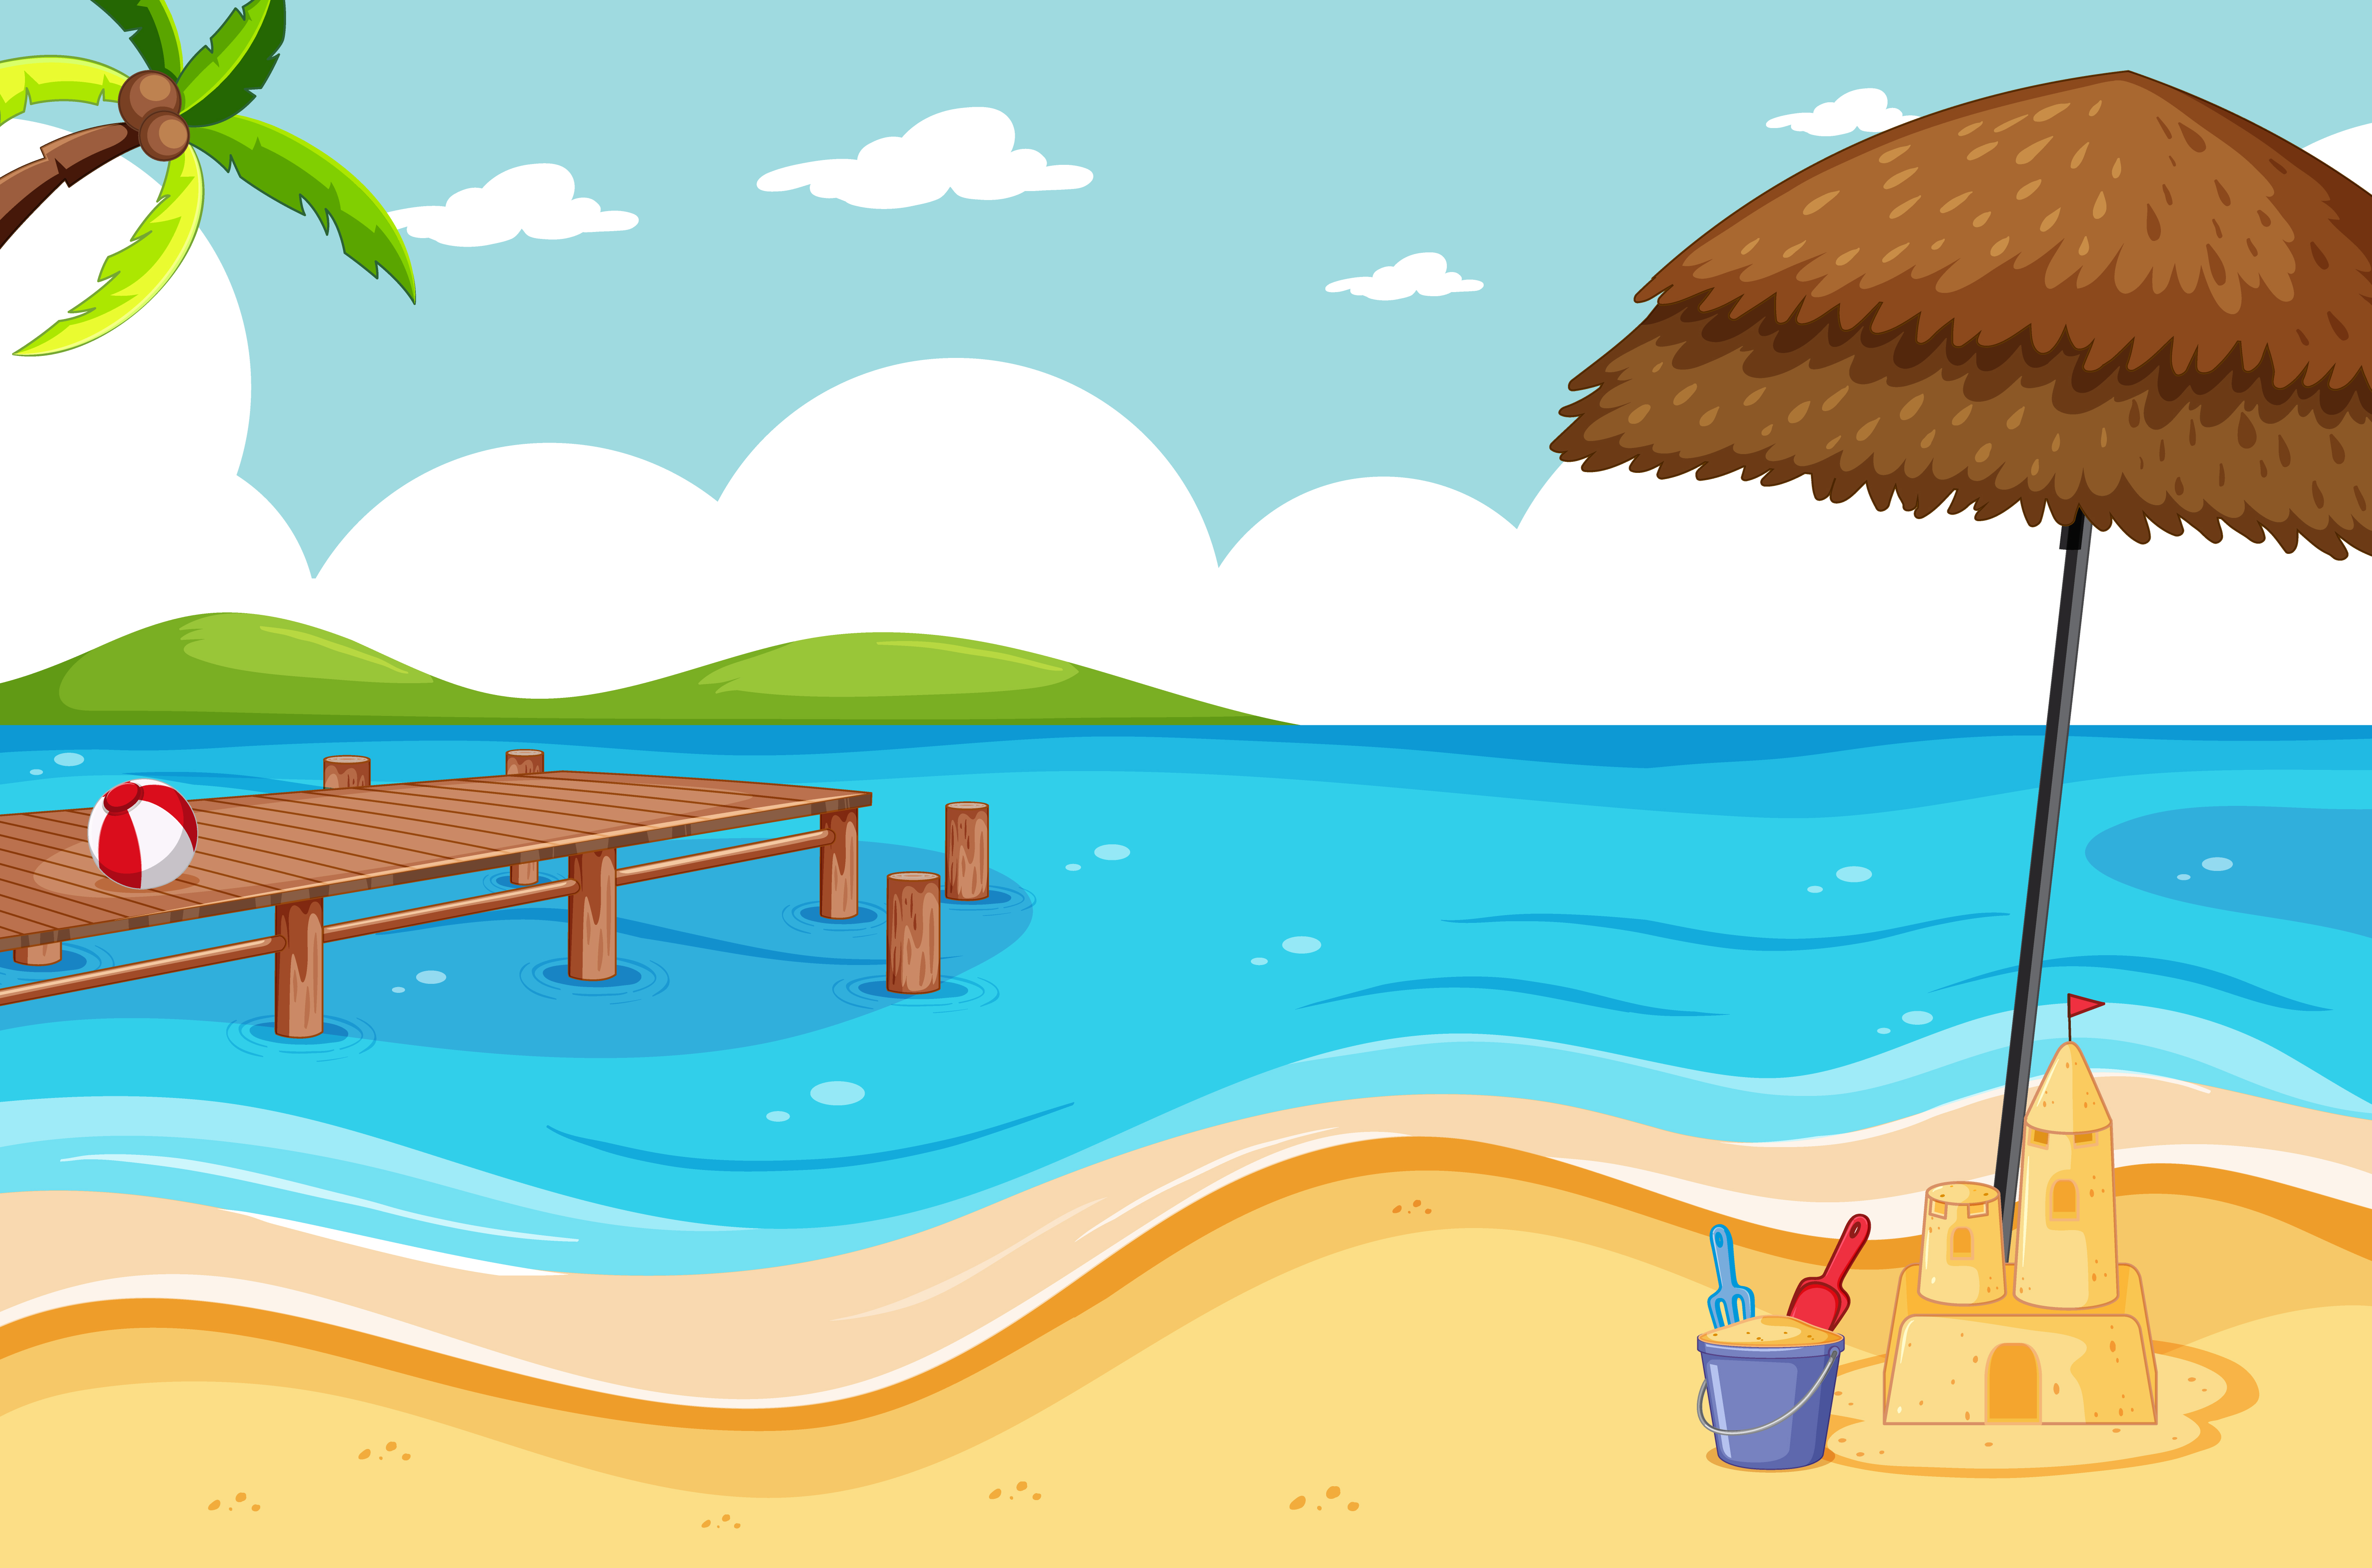 Tropical beach and sand beach 1268602 - Download Free Vectors, Clipart